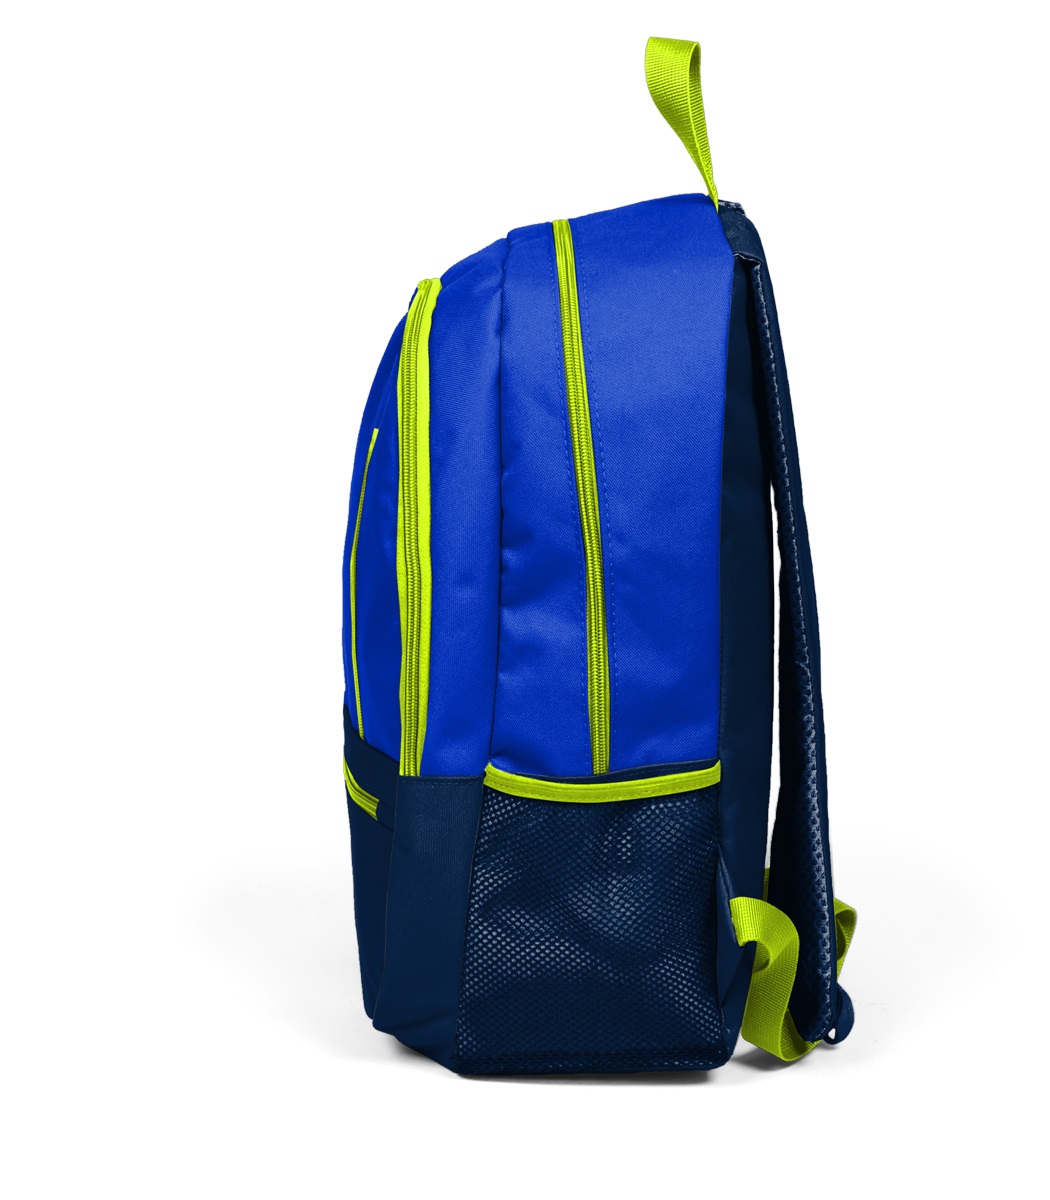 Coral High Sport Four Compartment Backpack - Saks Navy Blue